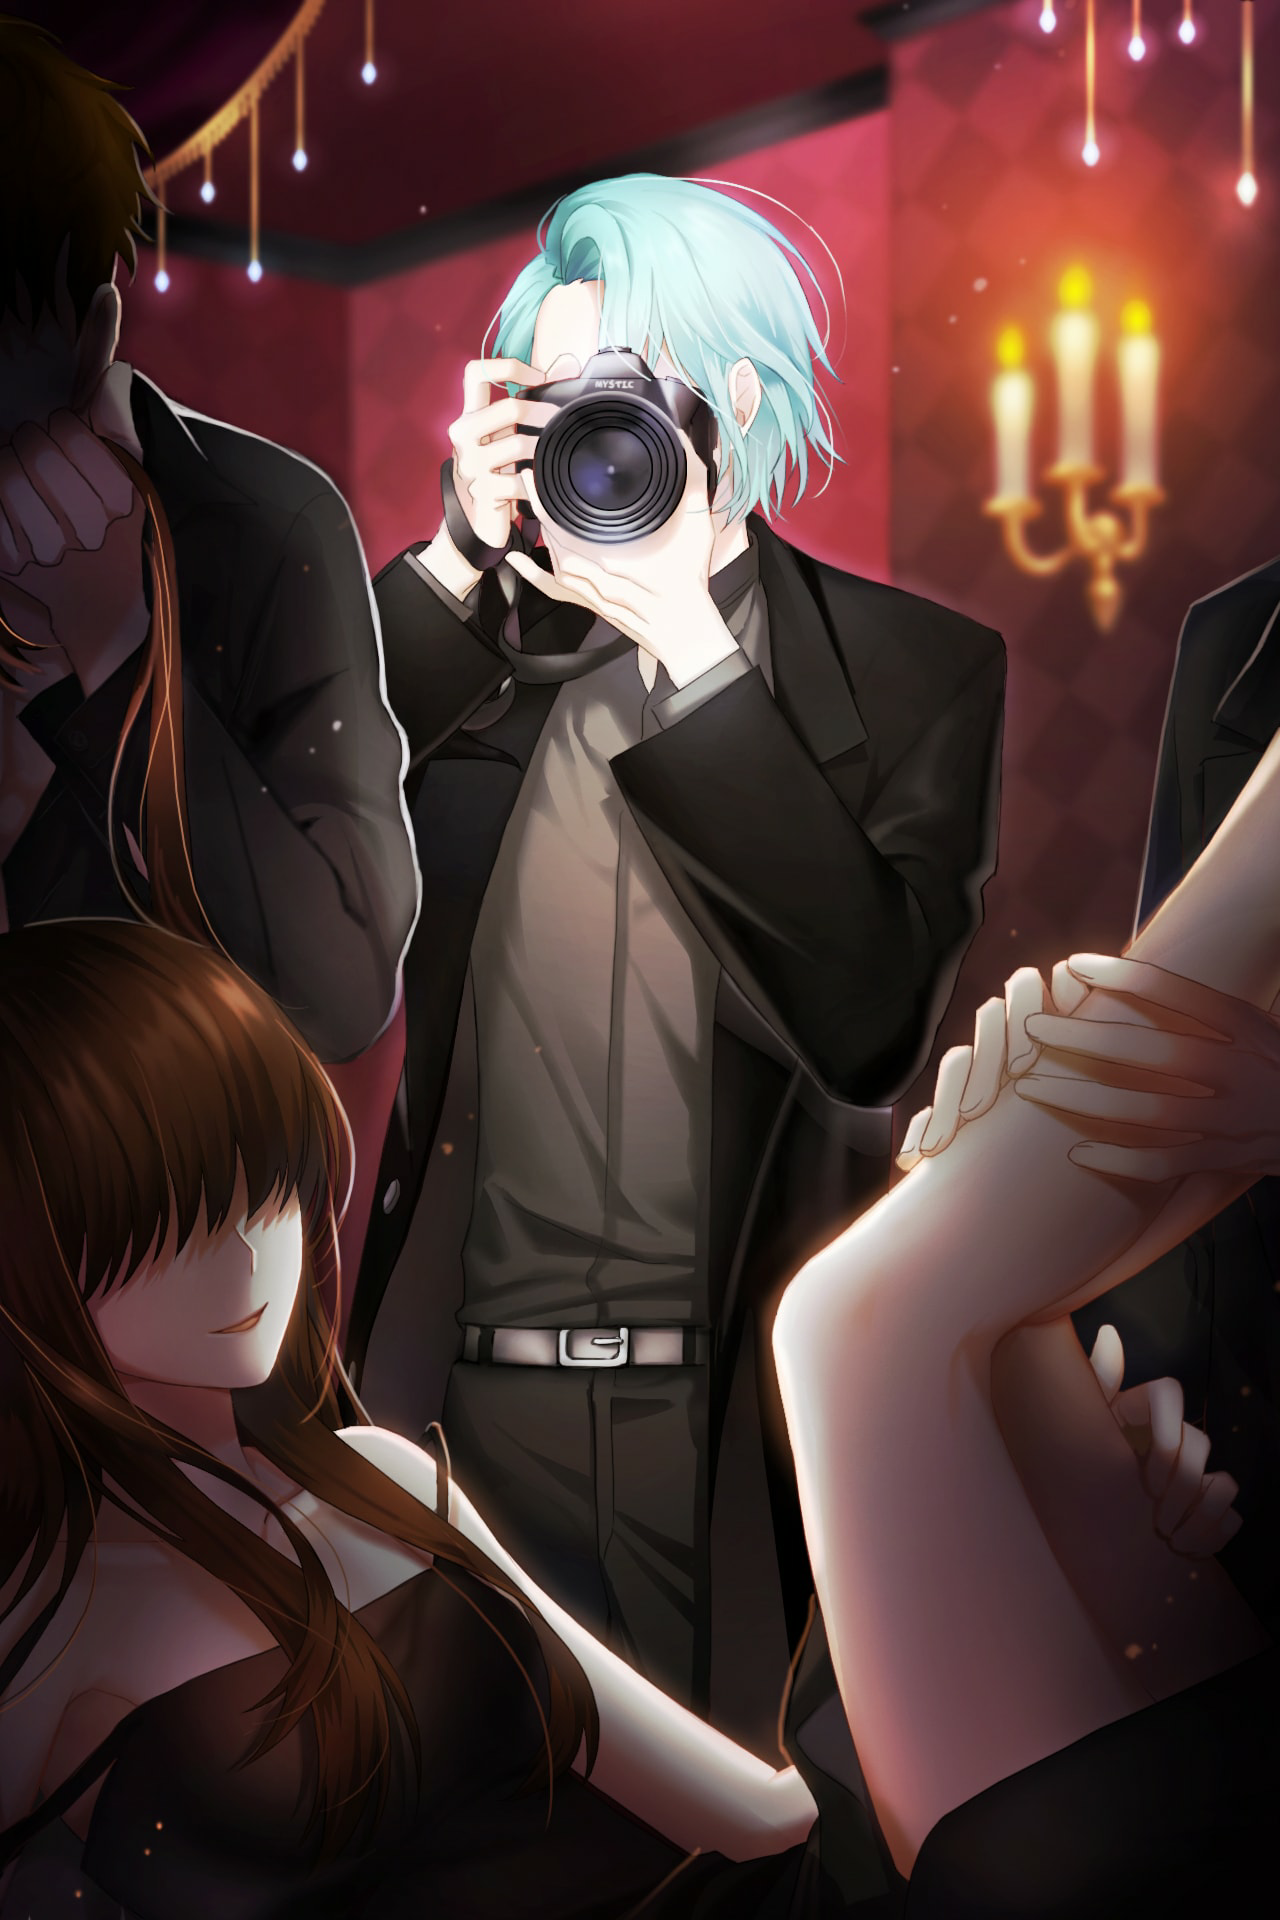 Mystic Messenger Endings And General Faq Behind A Monitor - roblox circus trip how to get bad ending mystic messenger